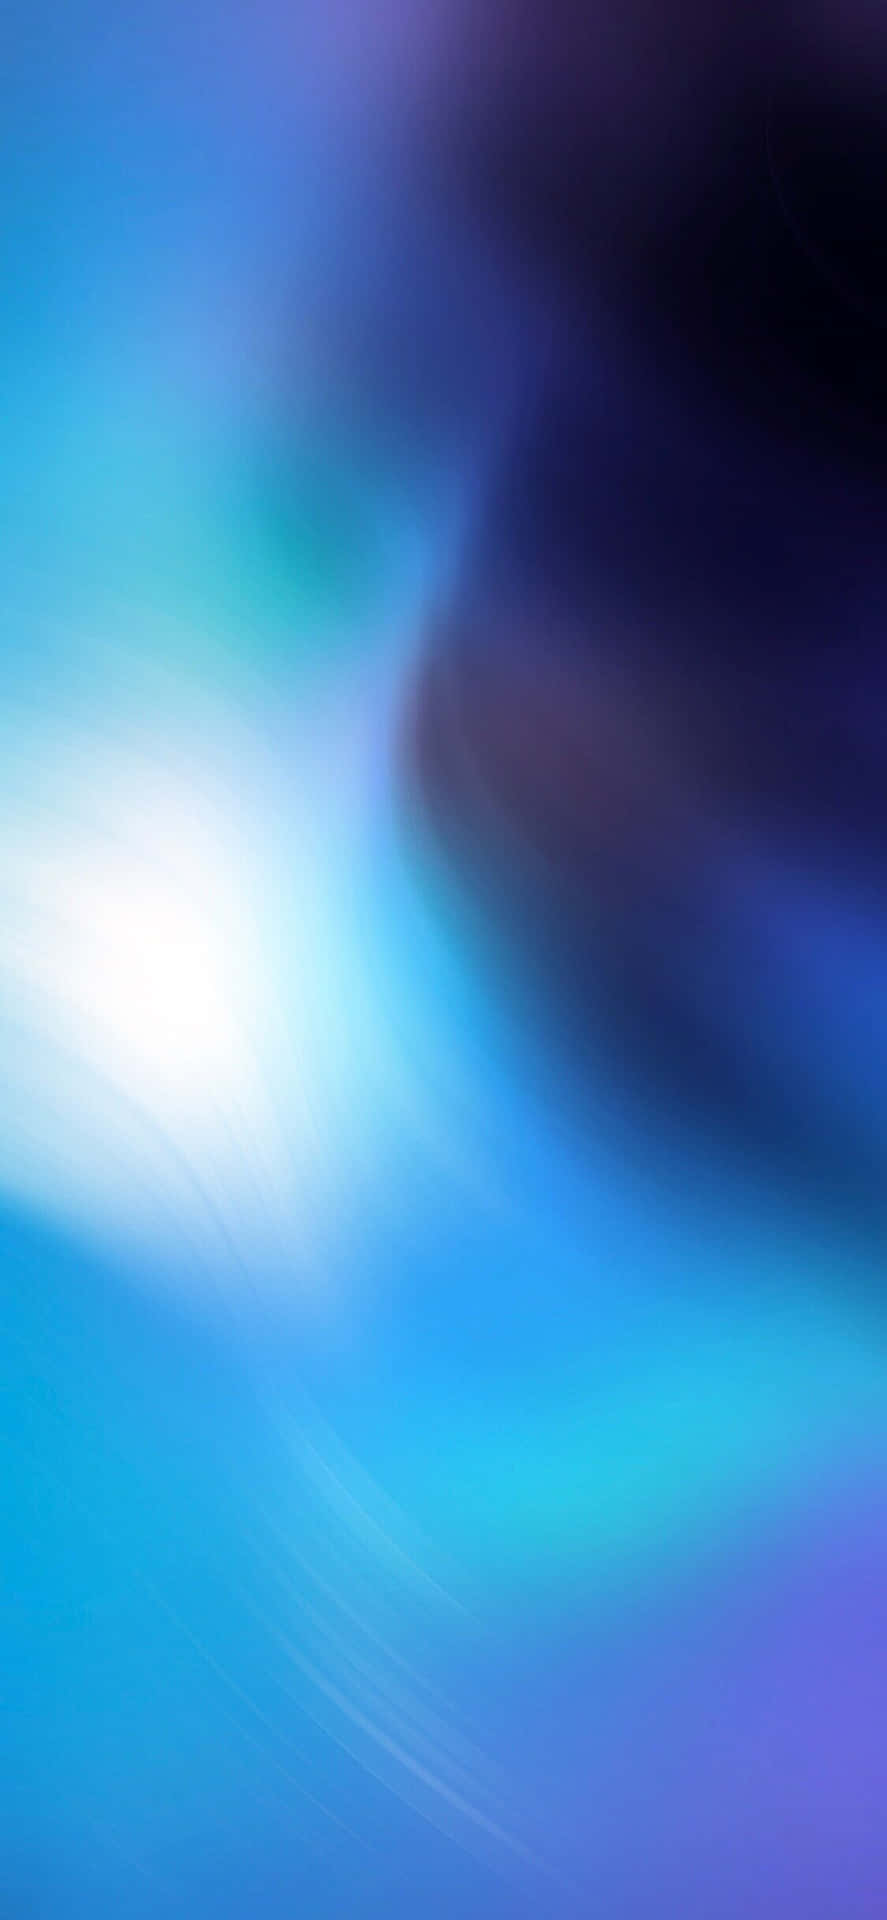 Cool Blue Abstract Iphone Wallpaper